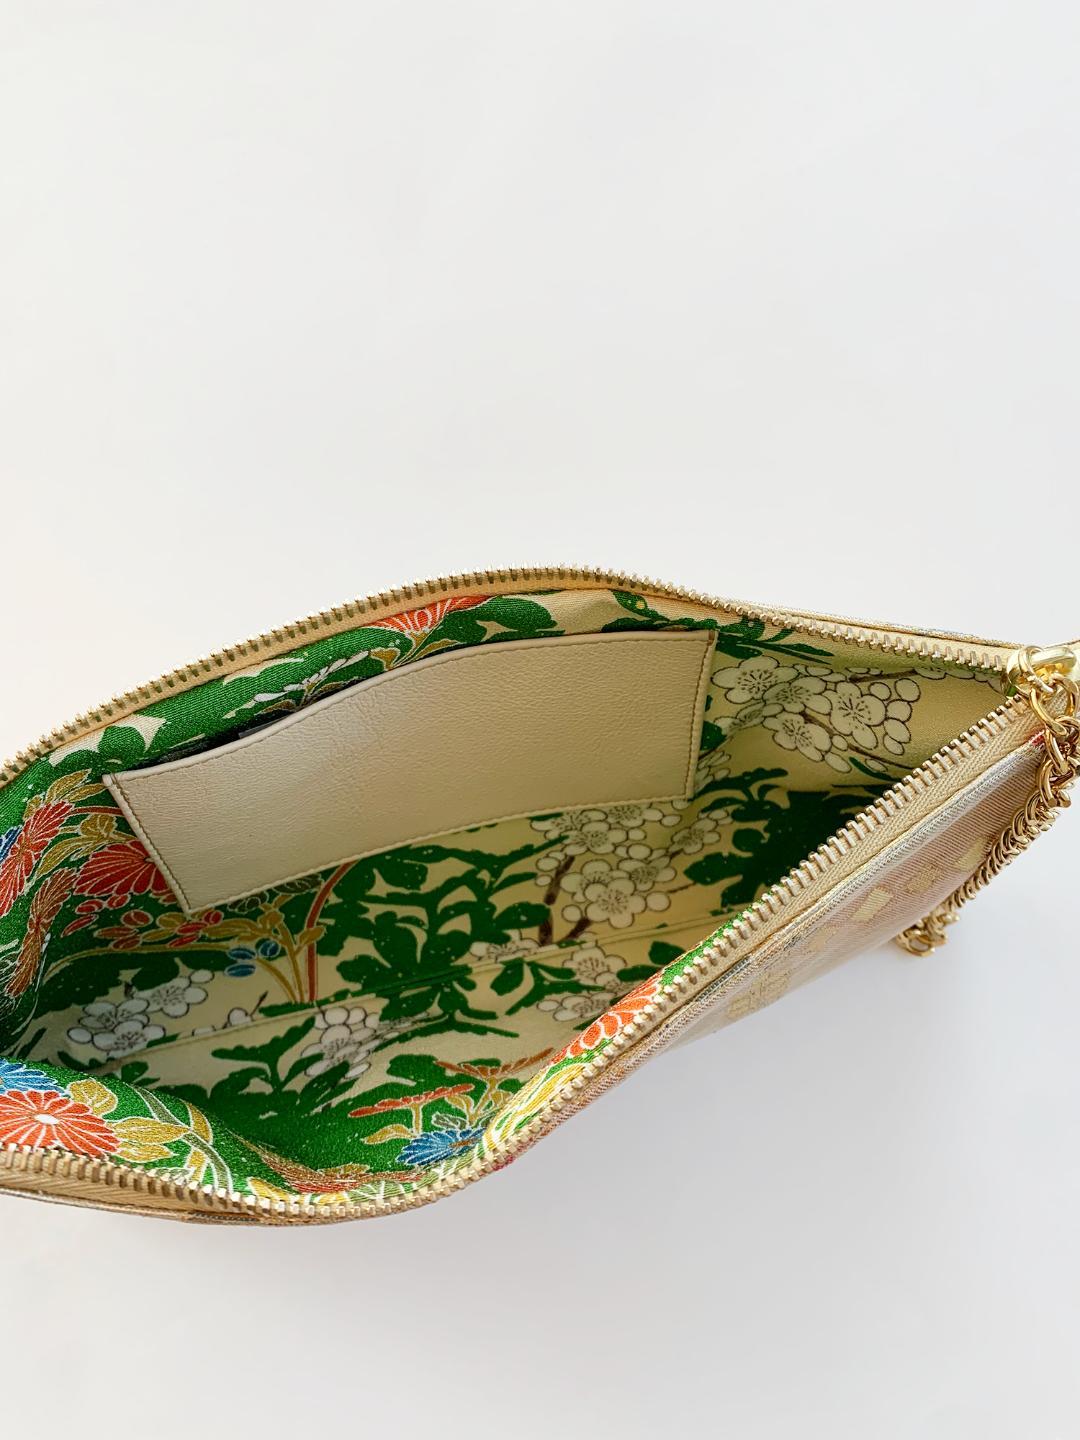 •	Made from precious vintage Japanese brocade from Kyoto. One of only three made.
•	29cm long  x 14cm high x 2 cm wide
•	22ct gold plated Wristlet Chain drop 16cm, fixed to the zip..
•	Lined in matching vintage Japanese silk with an open card